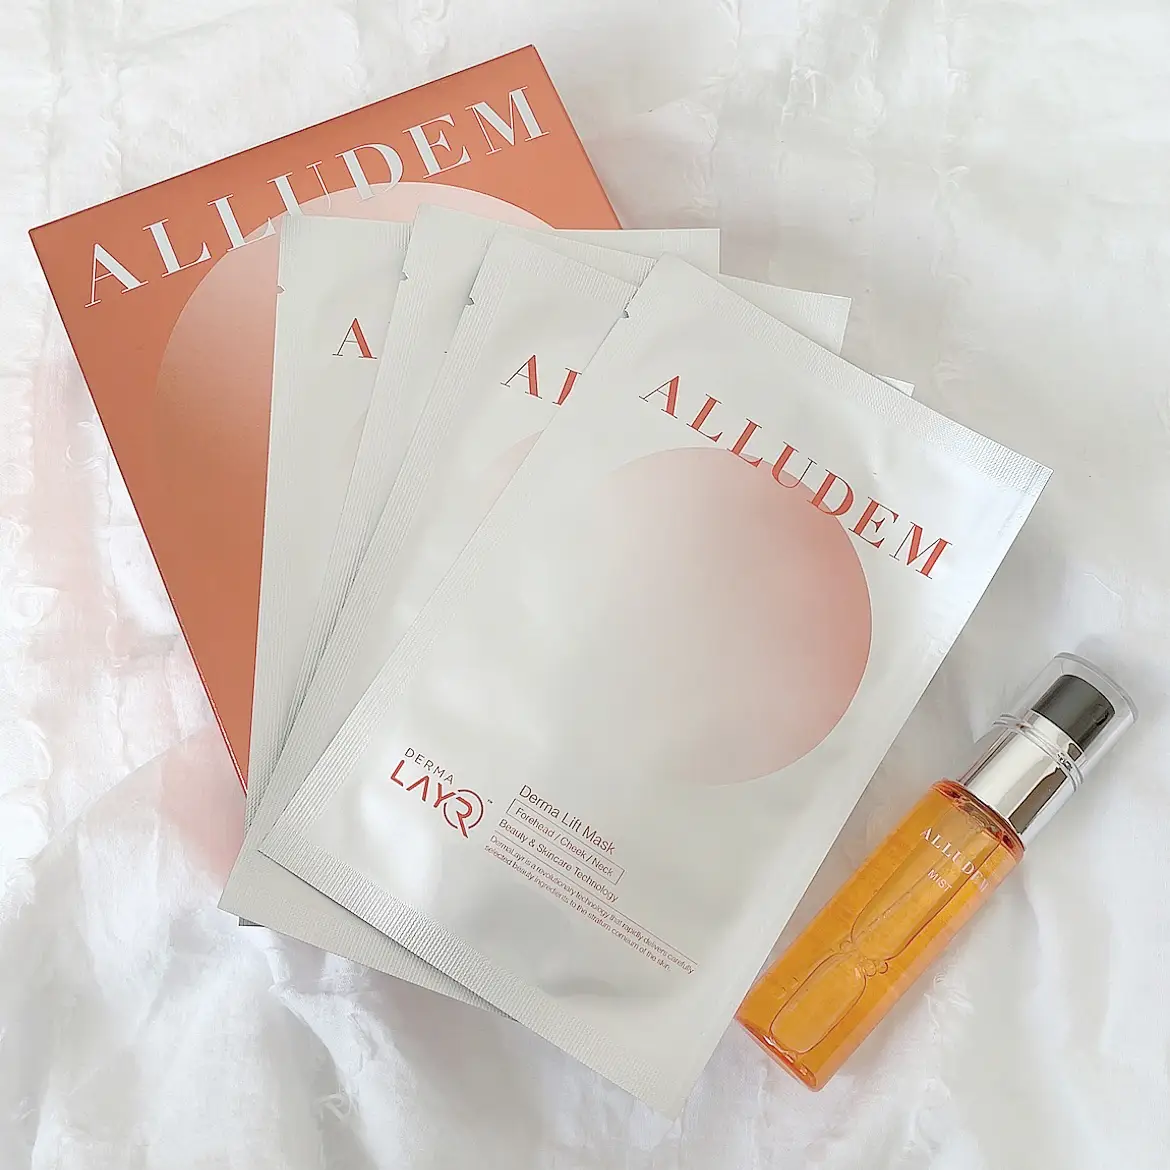 Take care of your skin with ALLUDEM rich mask   | Gallery posted